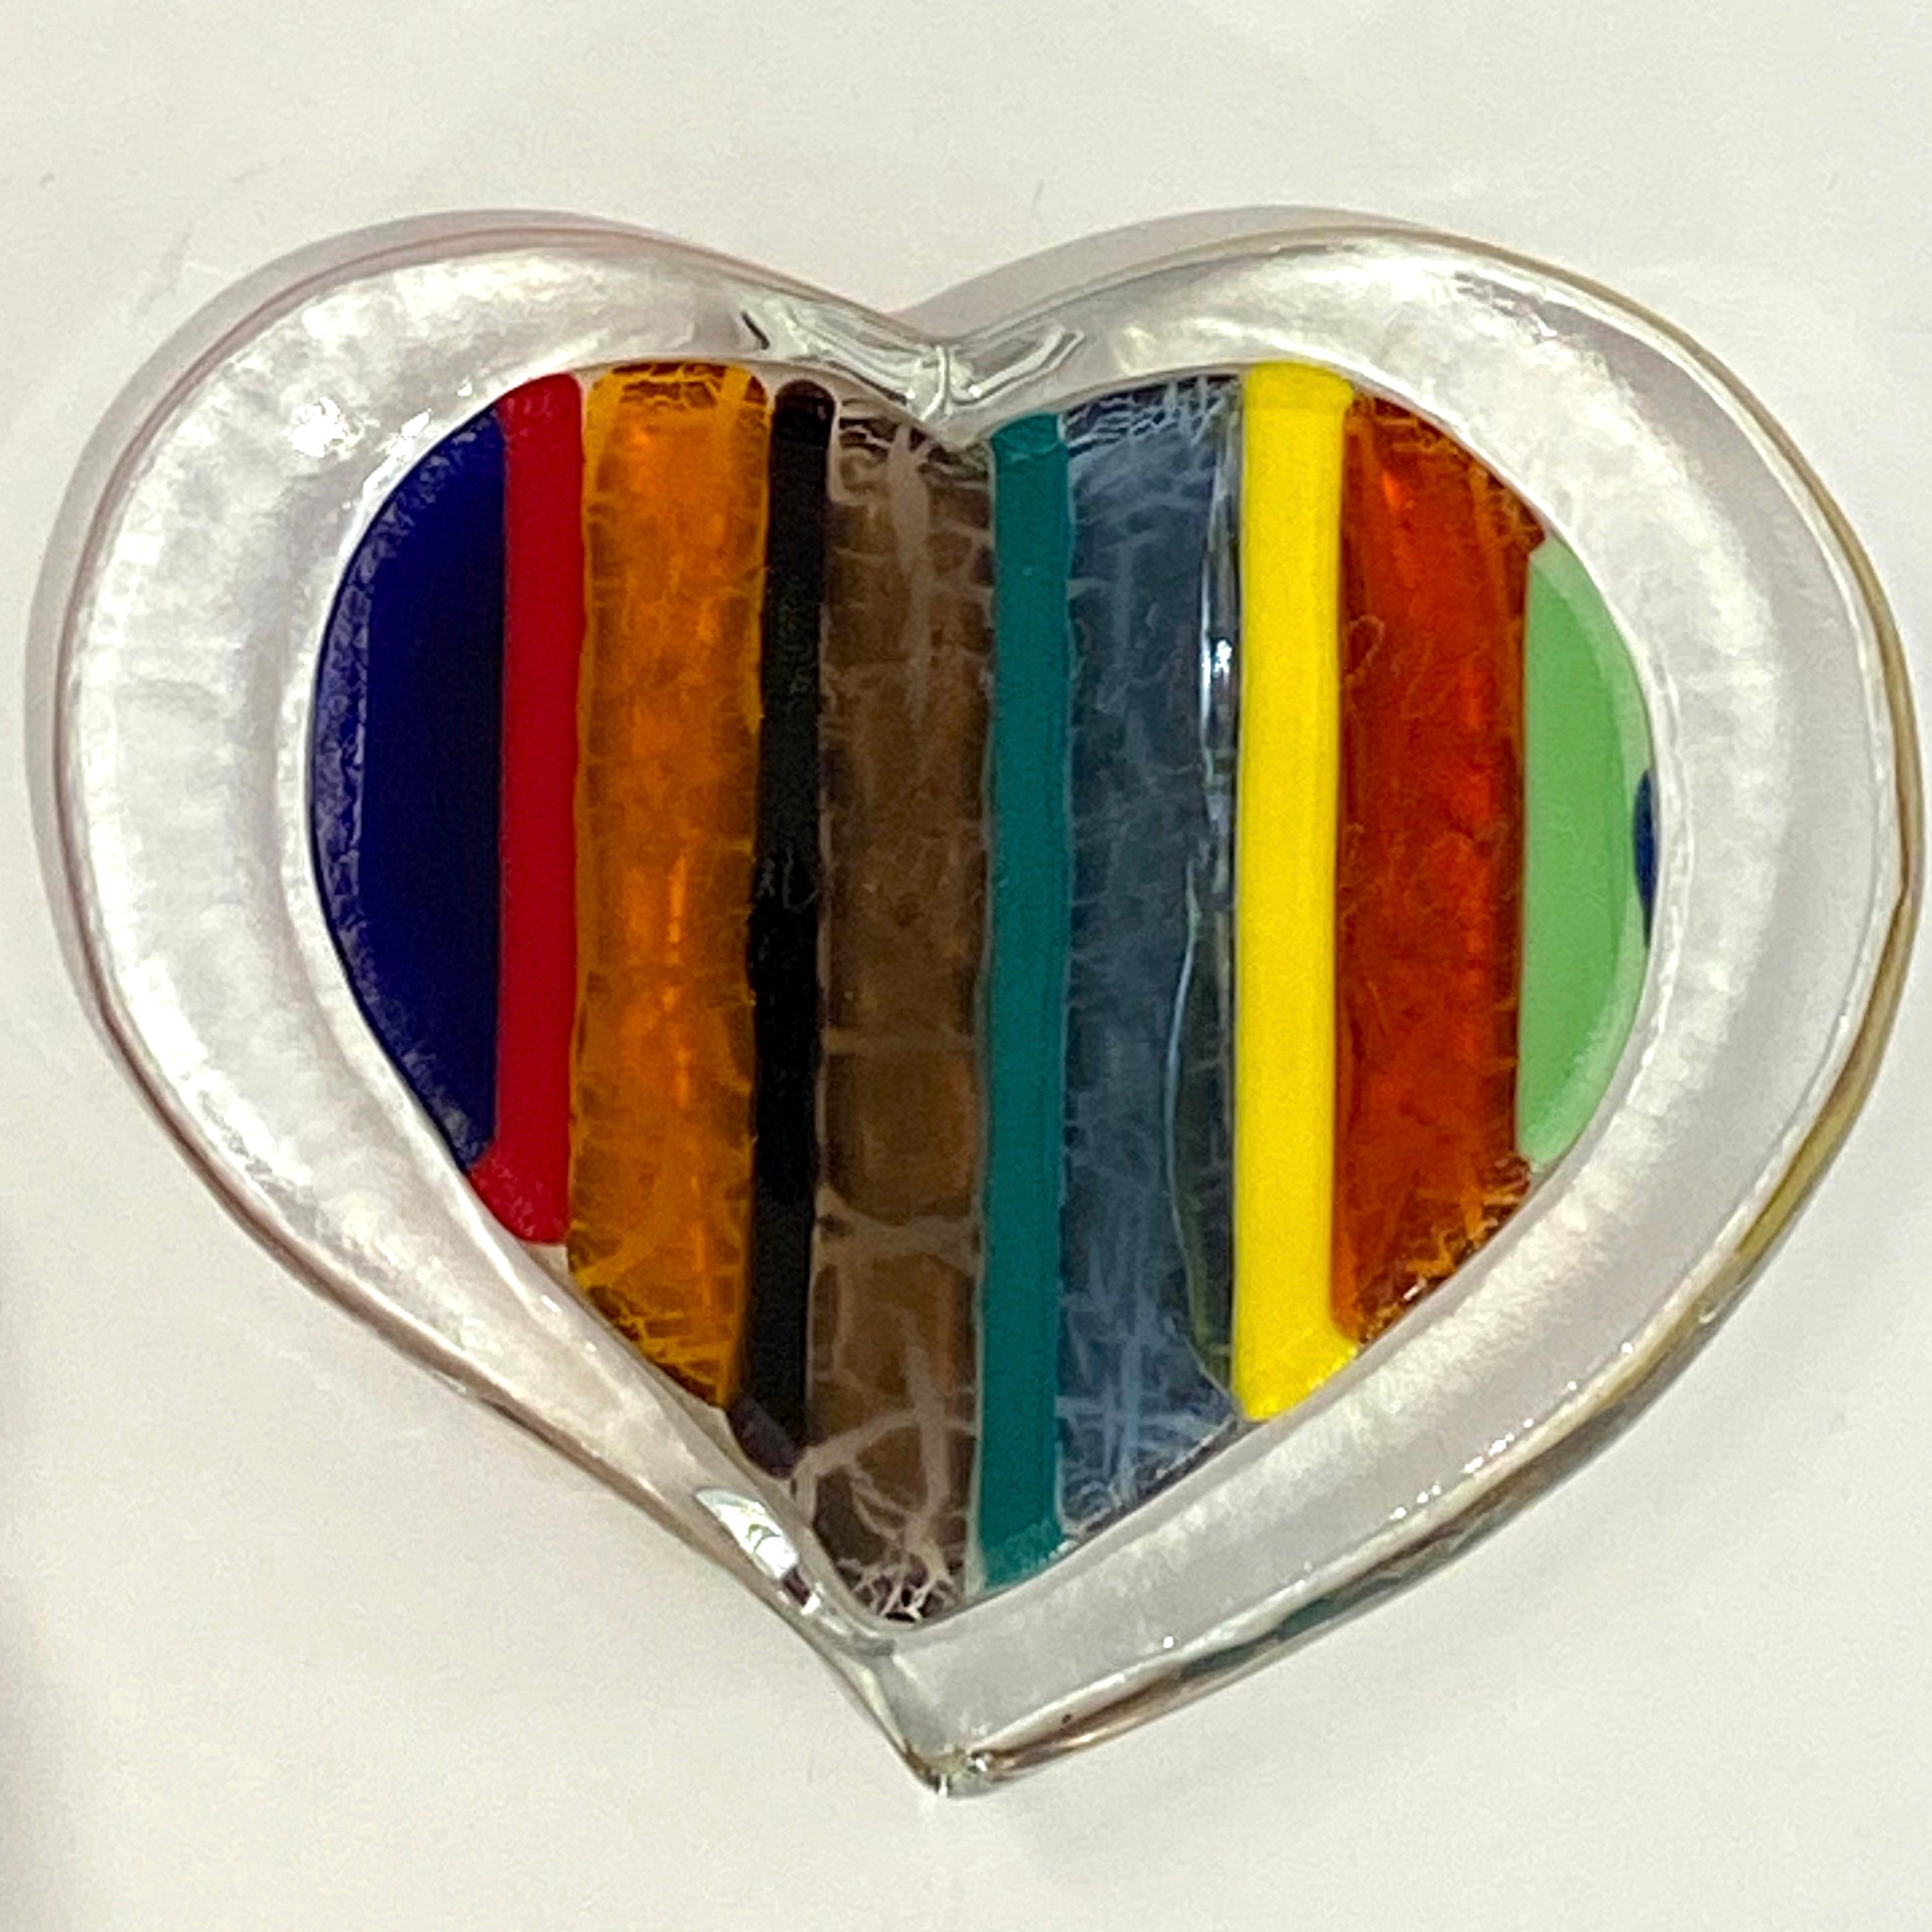 Contemporary Italian HEART paperweight with striped post-modern decor, exclusive for Cosulich Interiors & Antiques by Veve Glass, entirely handcrafted in colored Murano glass, gold, blue, yellow, black, red, dark green, and apple green jade colors,